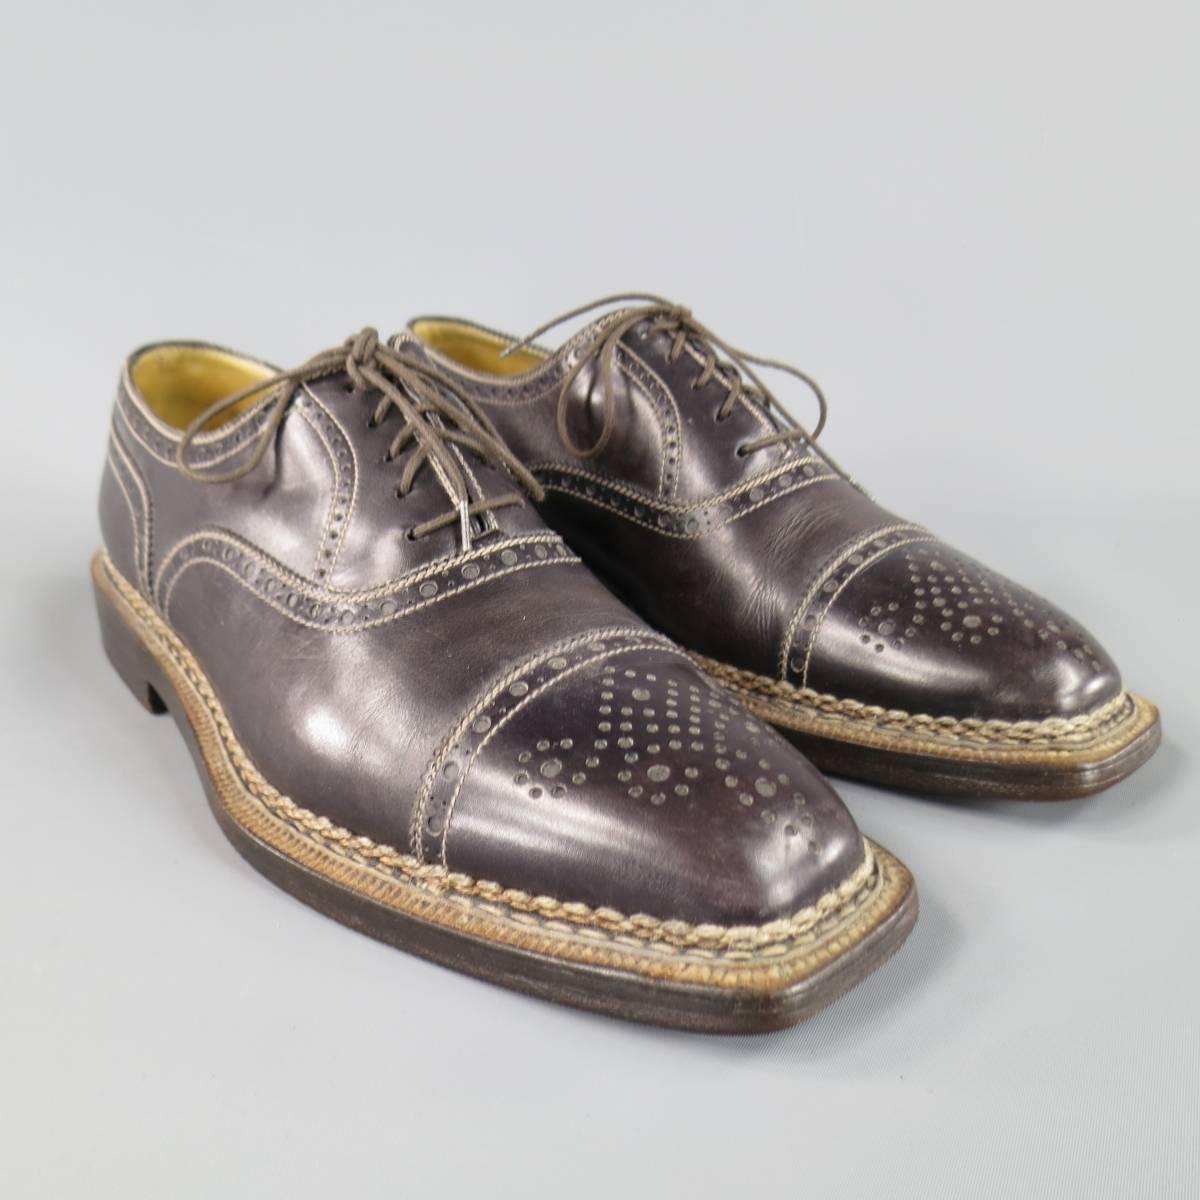 STEFANOBI Lace Up Shoe consists of leather material in a brown color tone. Designed in a square toe front, perforated wing-tip front with cap-toe detailing. Contrast stitching throughout body and brown leather sole. Made in Italy.
 
Good Pre-Owned